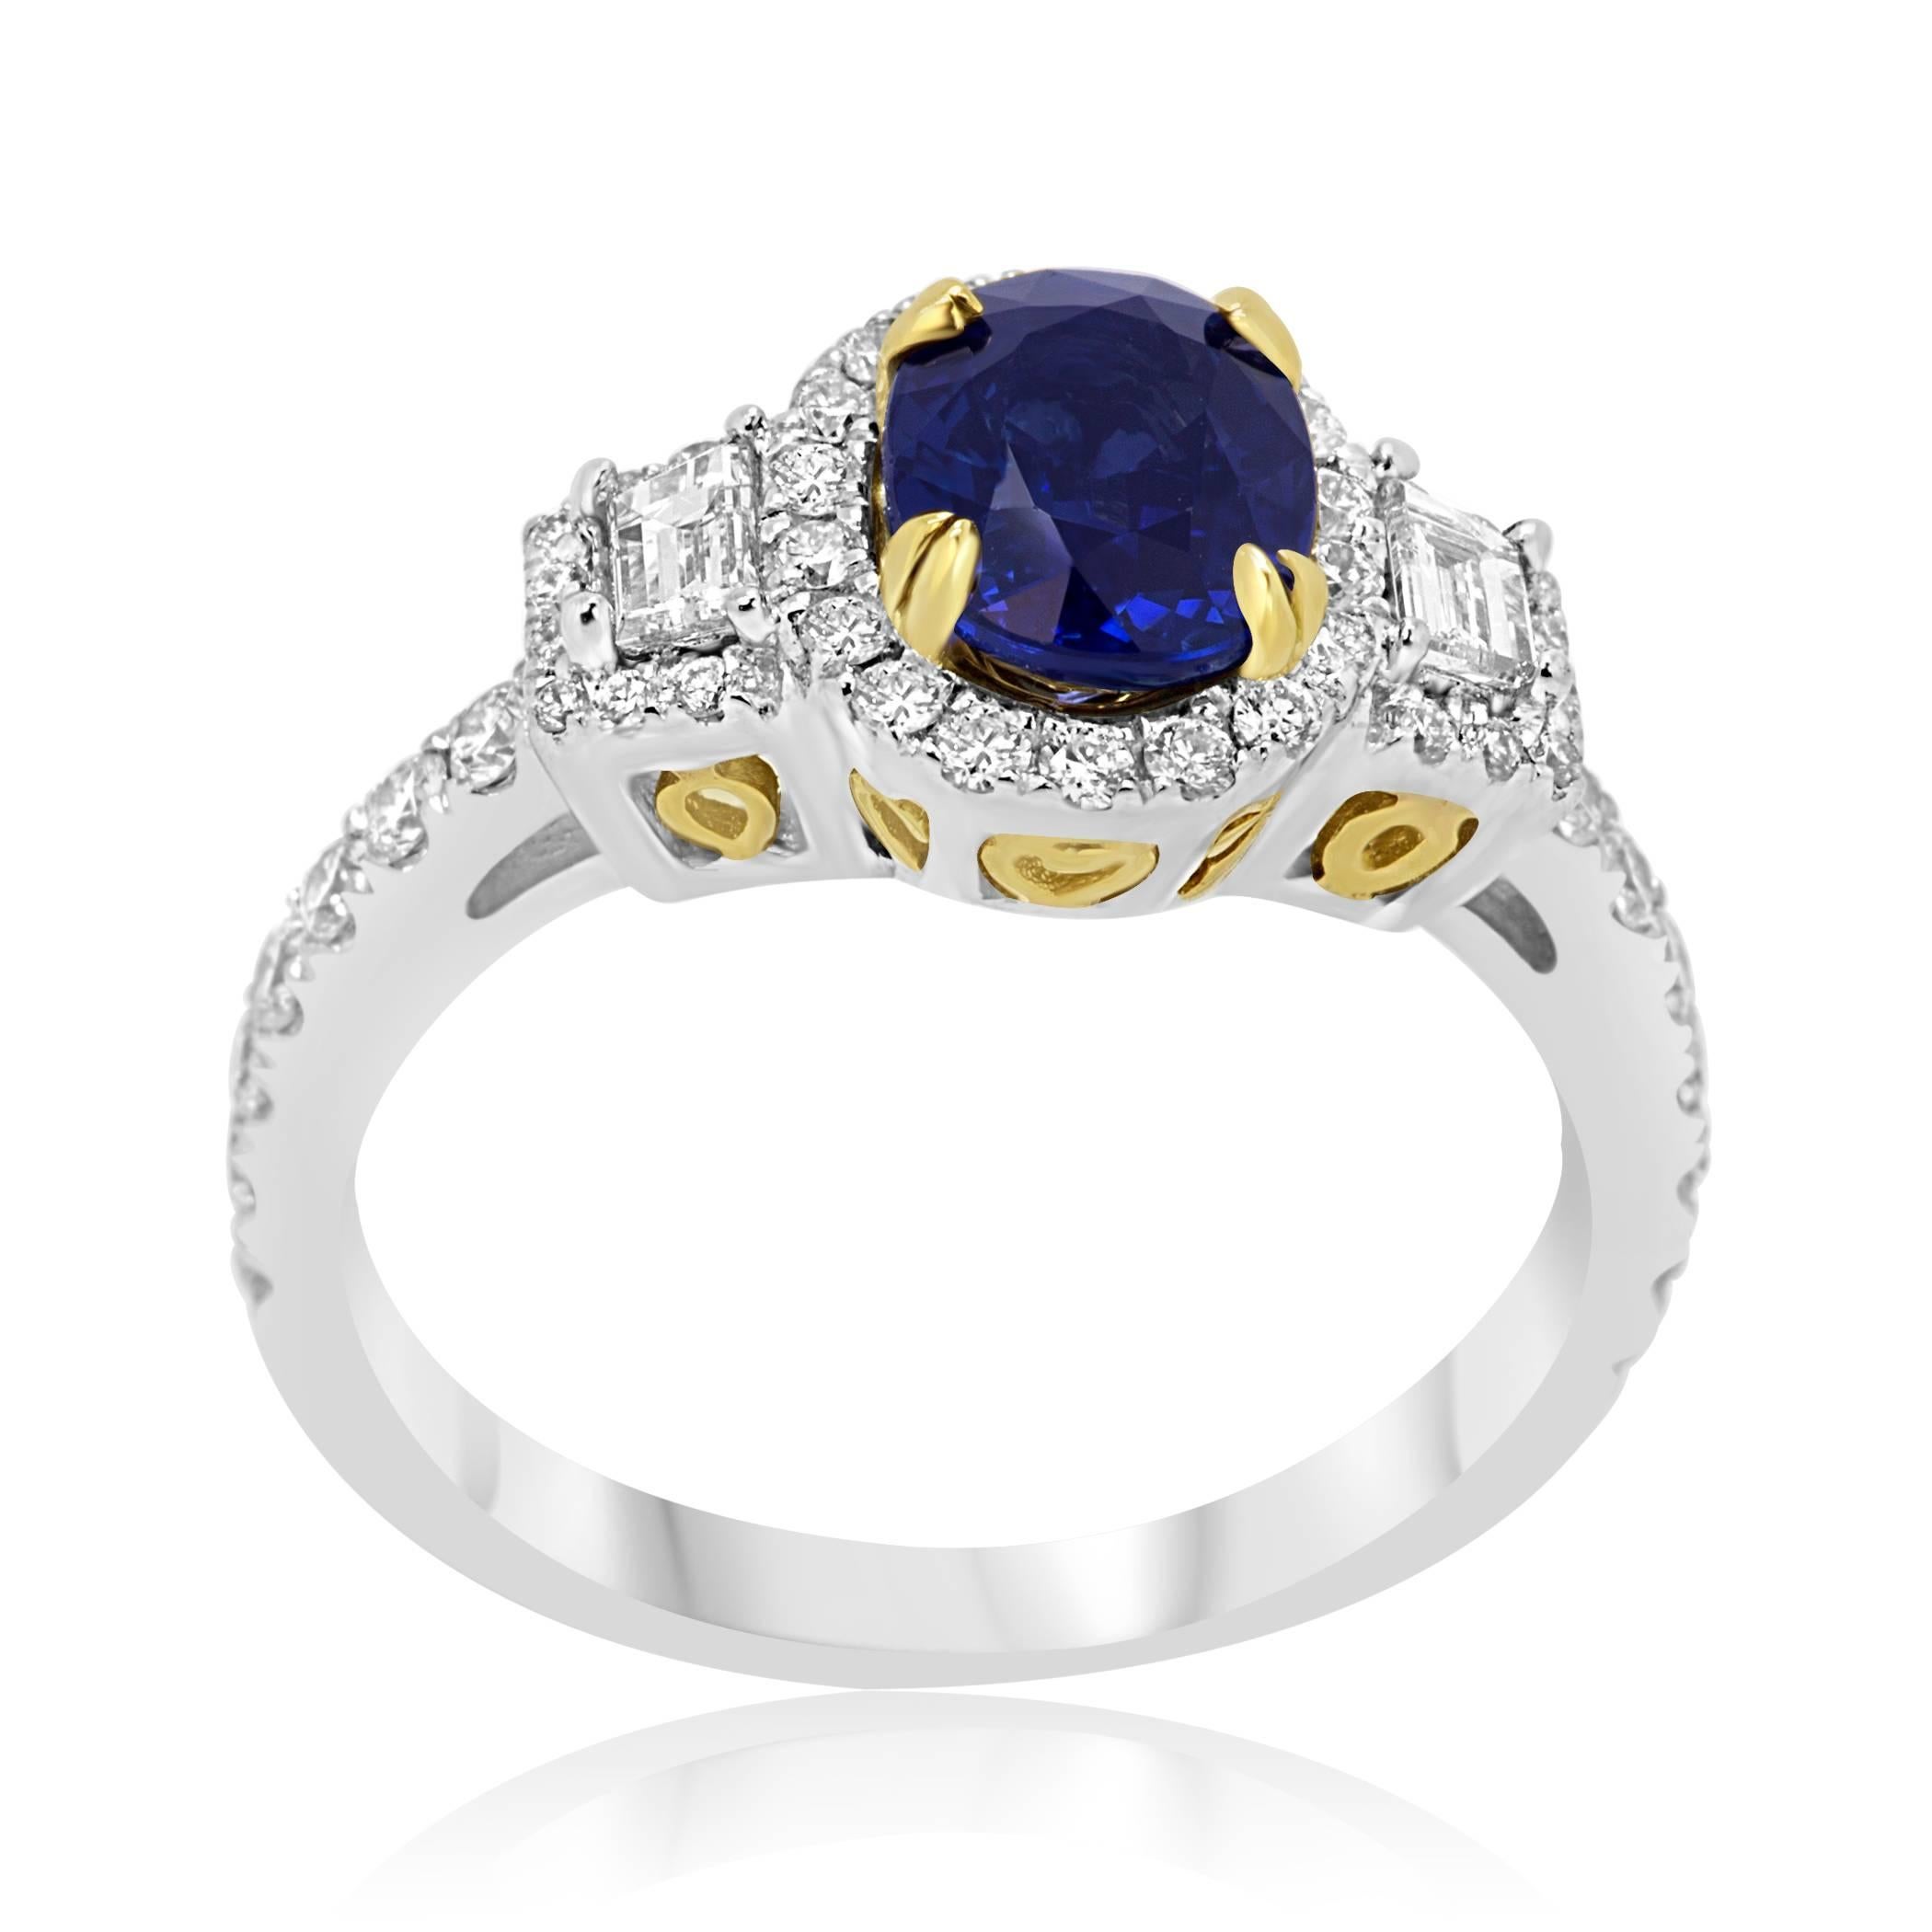  Blue Sapphire Oval 1.64 Carat flanked by 2 White Diamond Trapezoid on the side 0.20 Carat encircled in a single halo of white round diamond 0.53 Carat in stunning 14K White and Yellow Gold Ring.

Total Stone Weight 2.37 Carat.